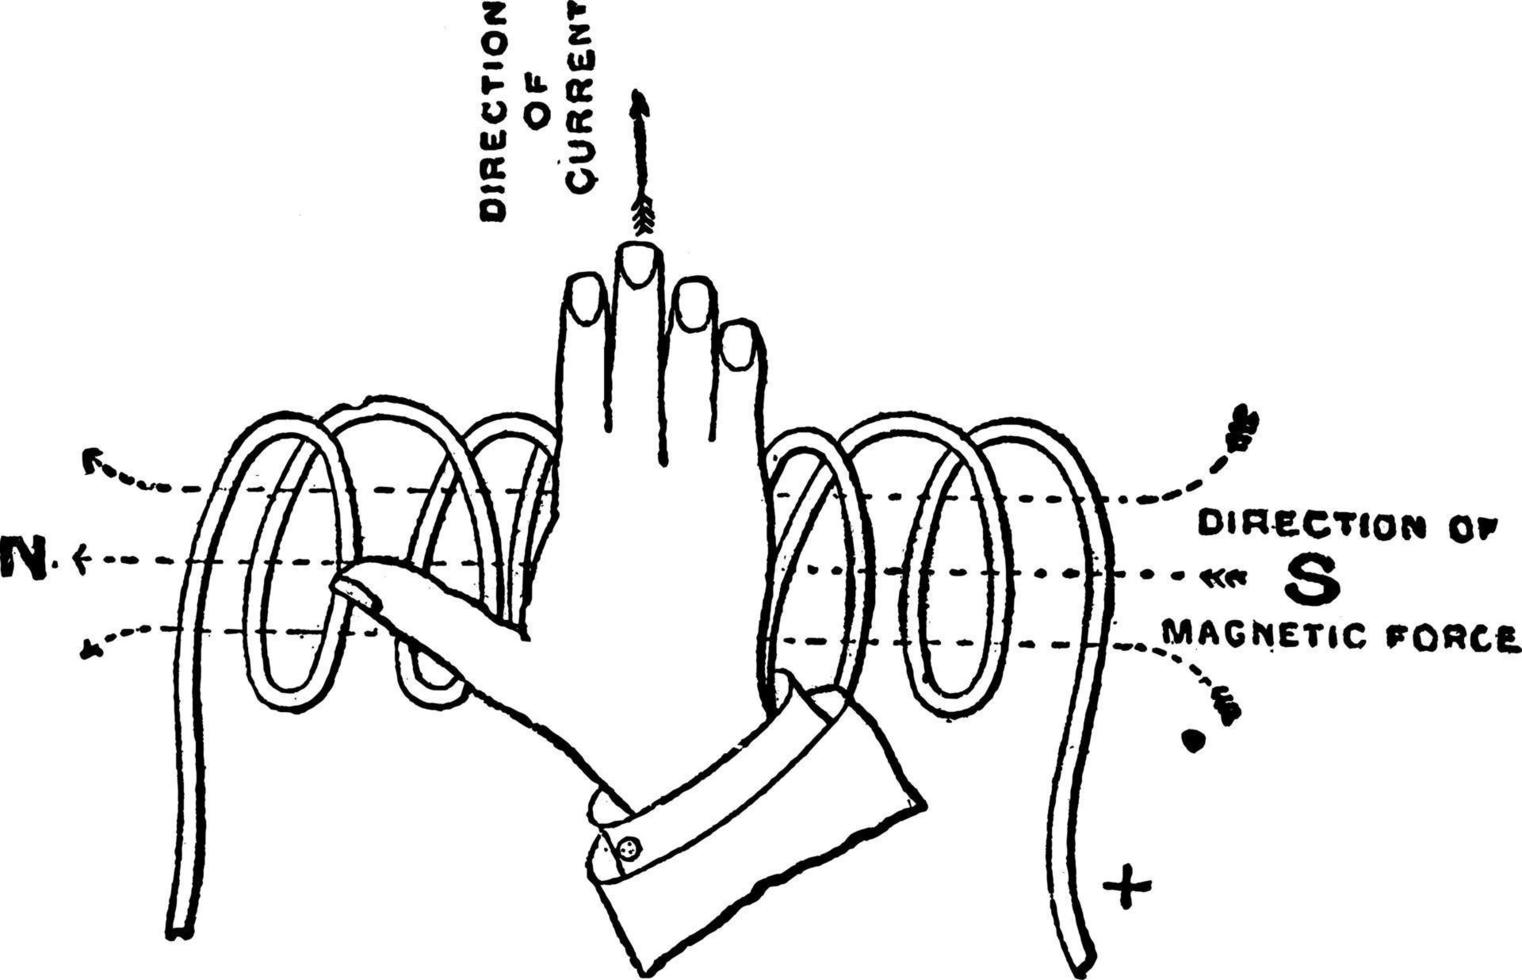 Right Hand Rule, Solenoid or Right hand rule for polarity of a solenoid, vintage illustration. vector